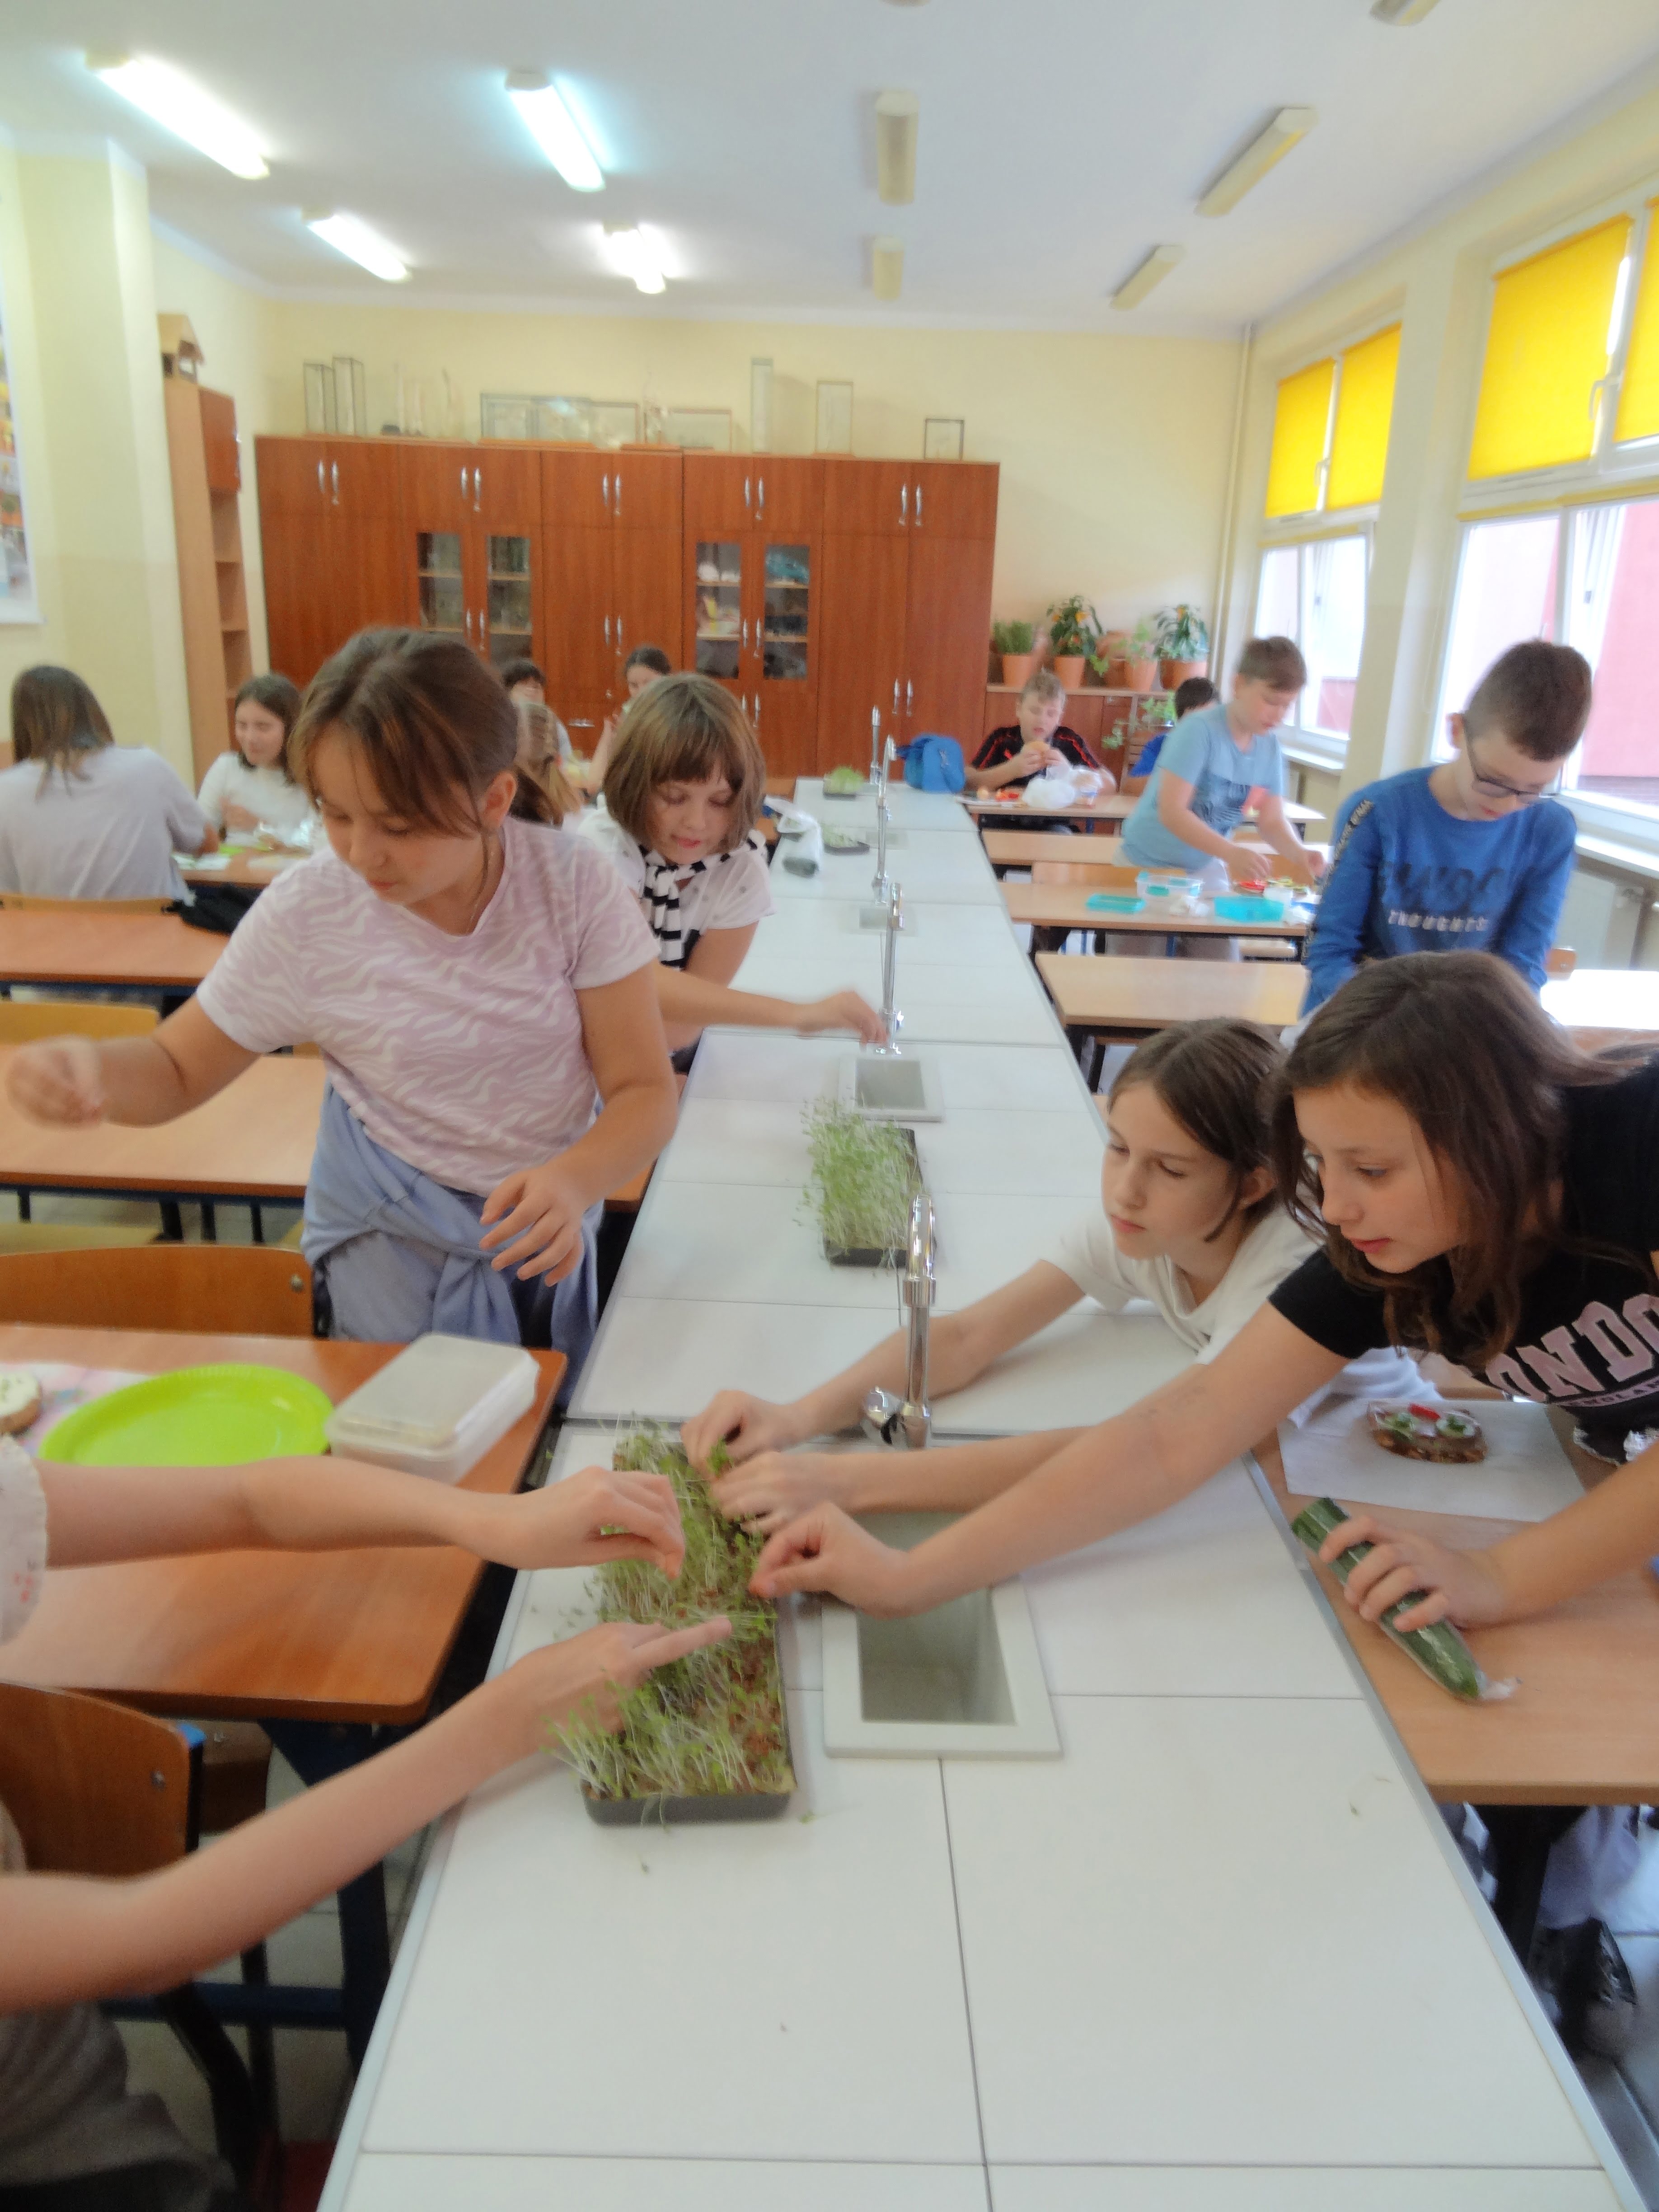 Investing in Legnica's youth